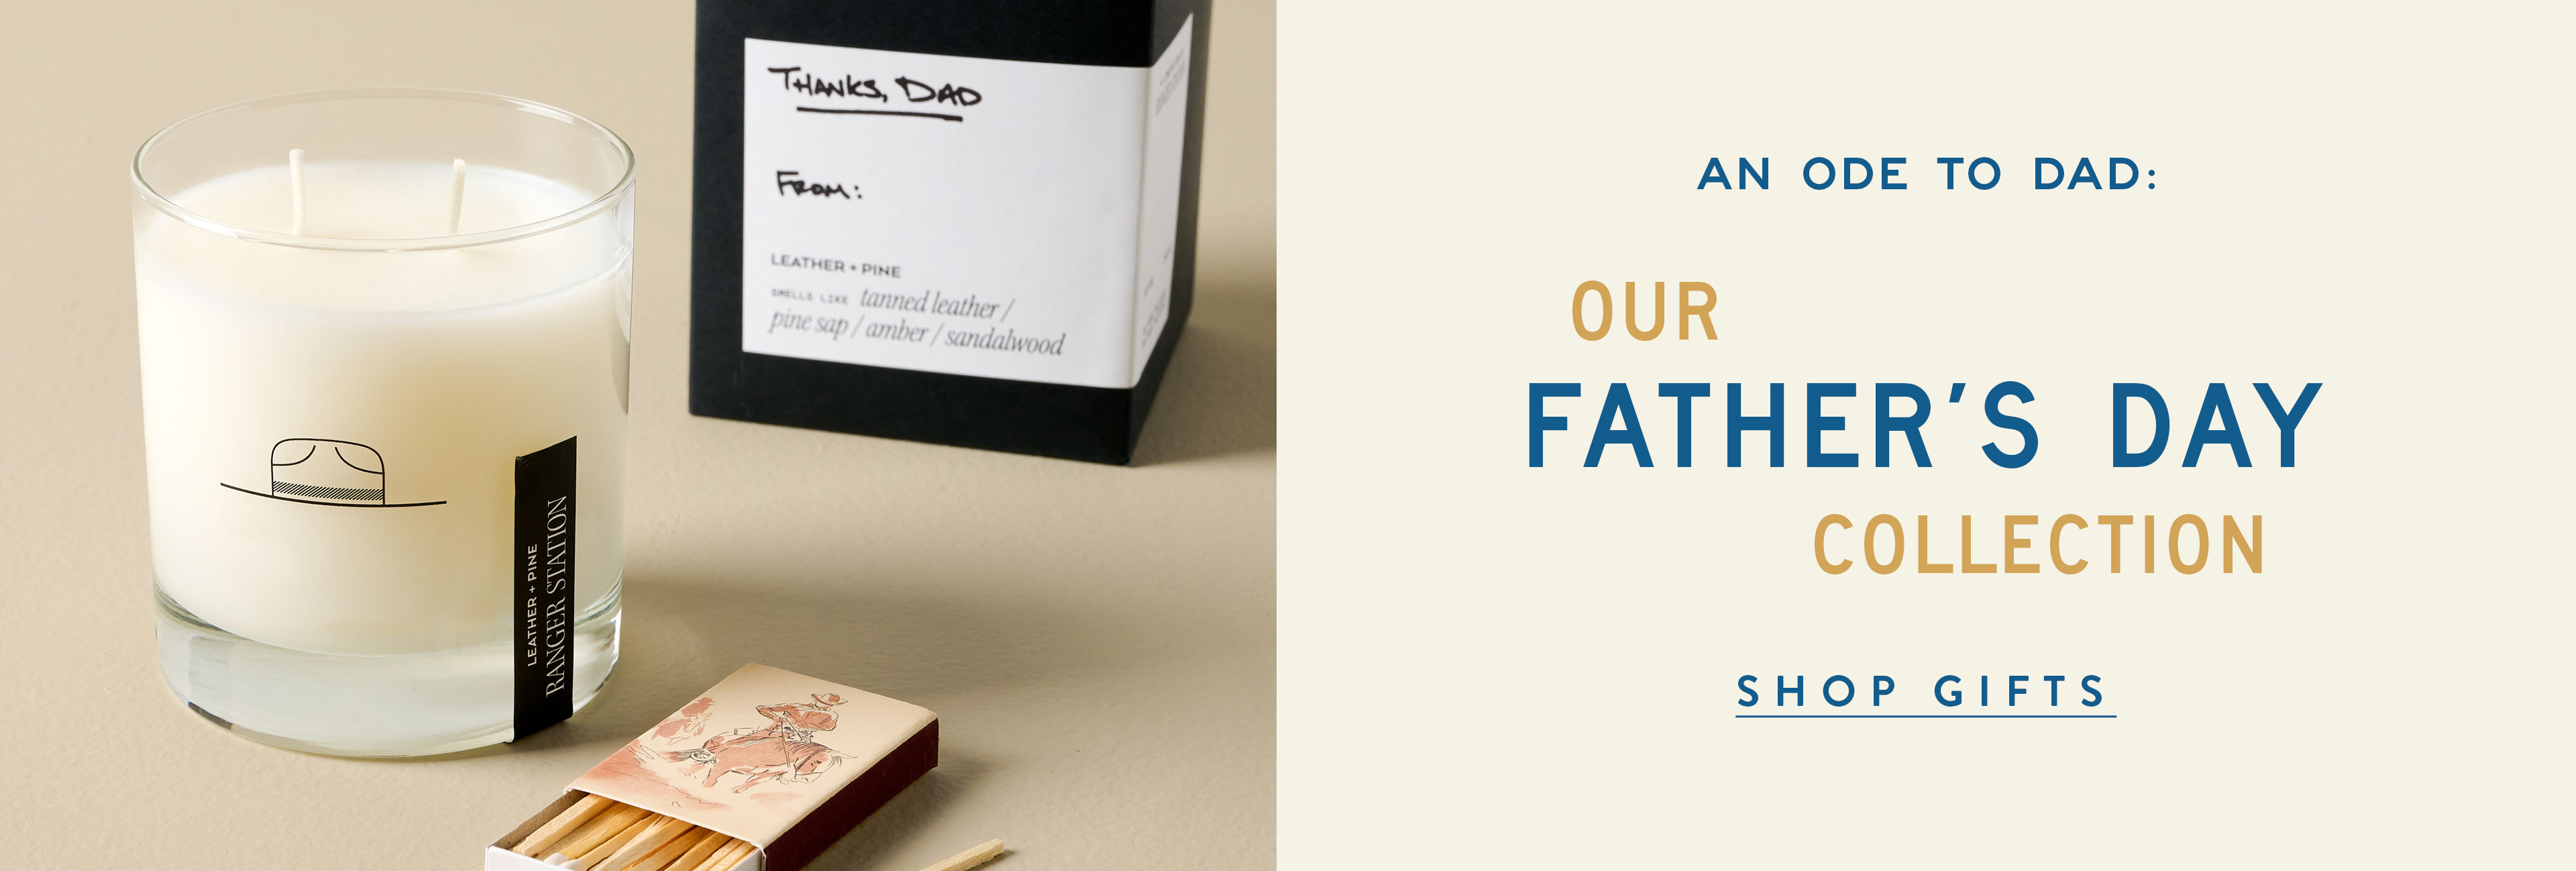 An ode to Dad: Our Father's Day Collection.  Shop Father's Day Gifts.